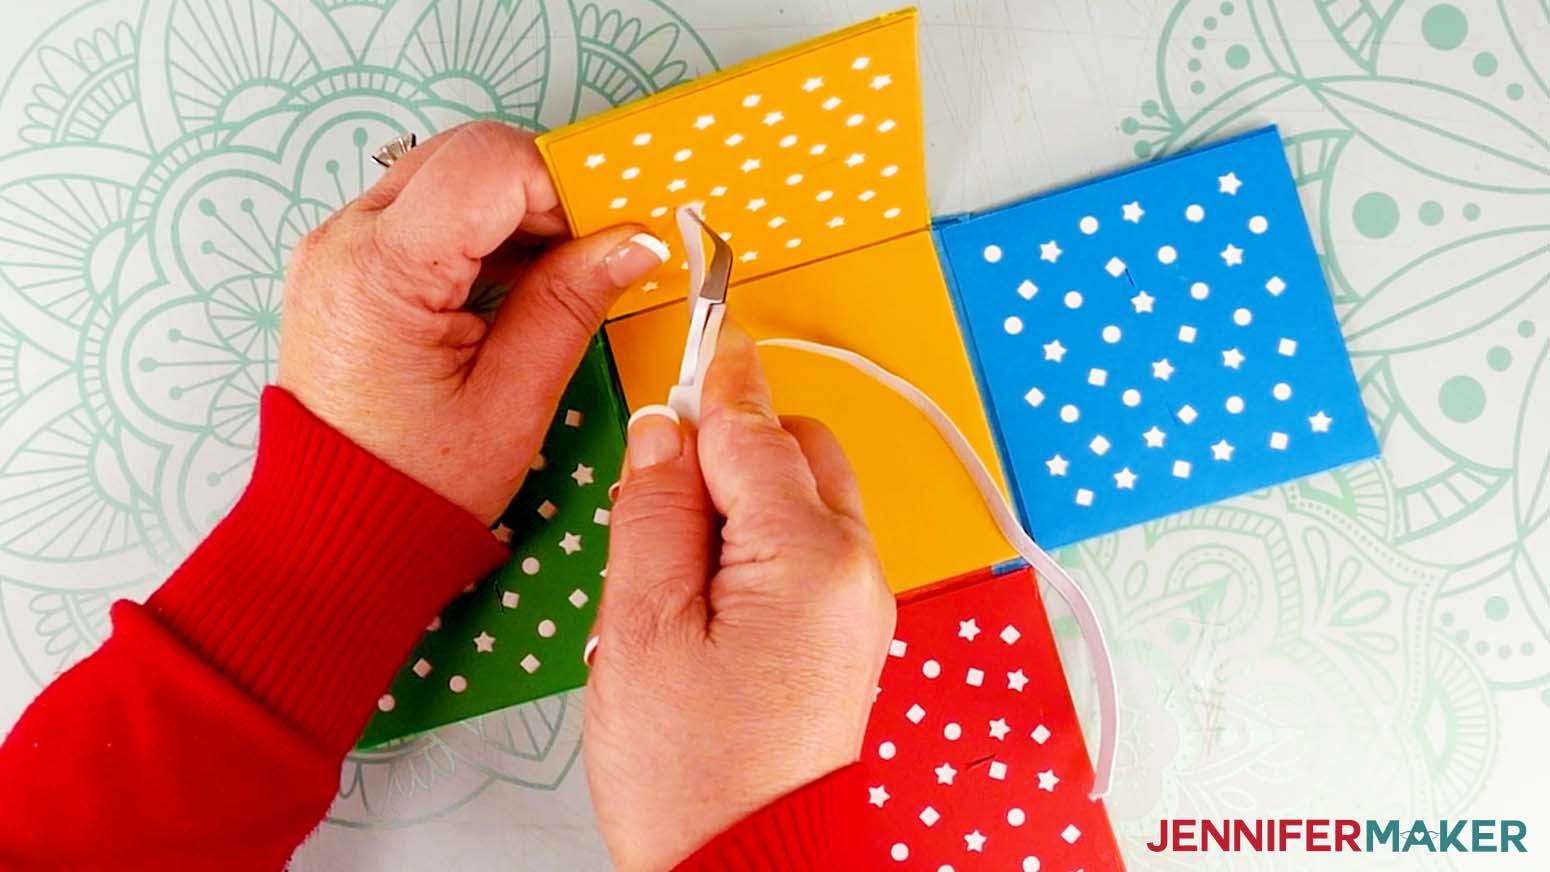 Use tweezers to push the end of the elastic through a slit on a decorated panel of the cardboard jumping box